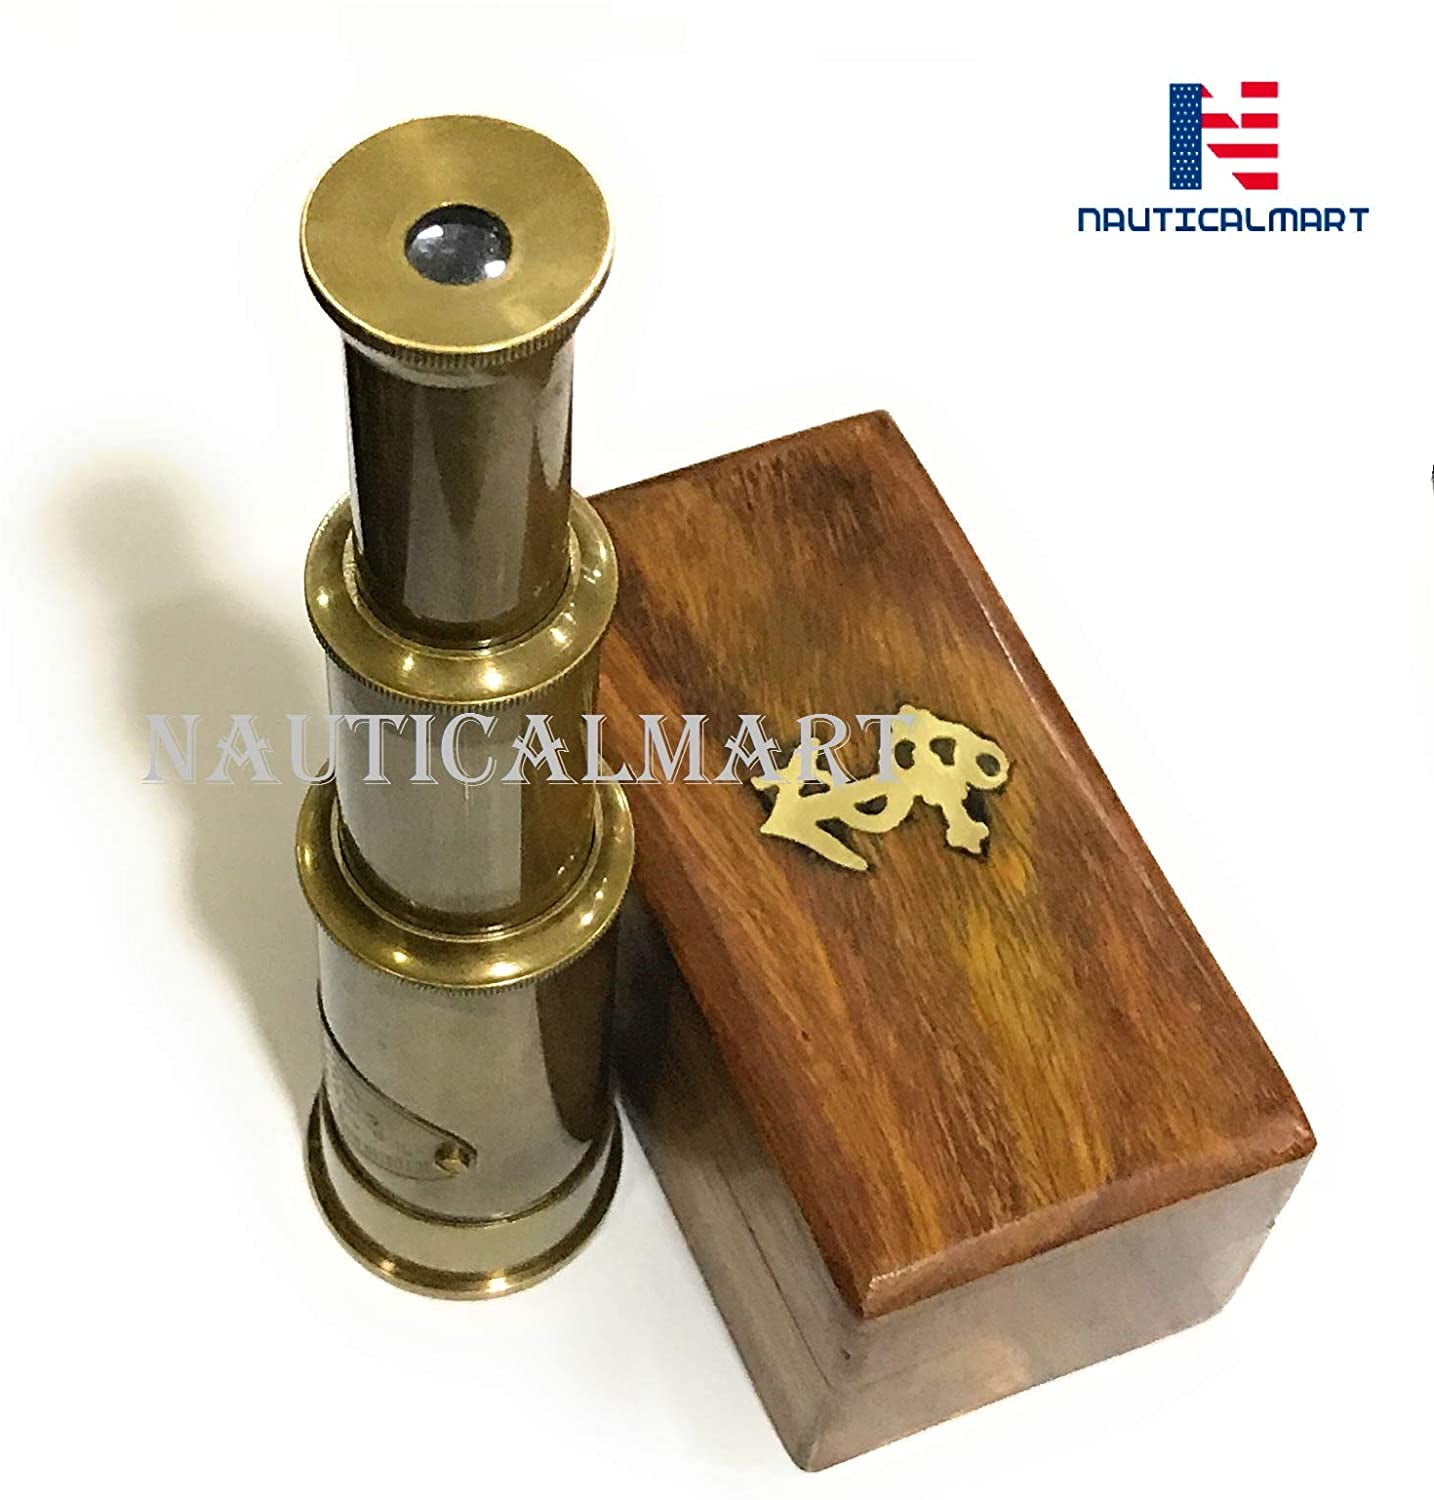 6 Handheld Brass Telescope with compass Pirate Navigation Wooden Box